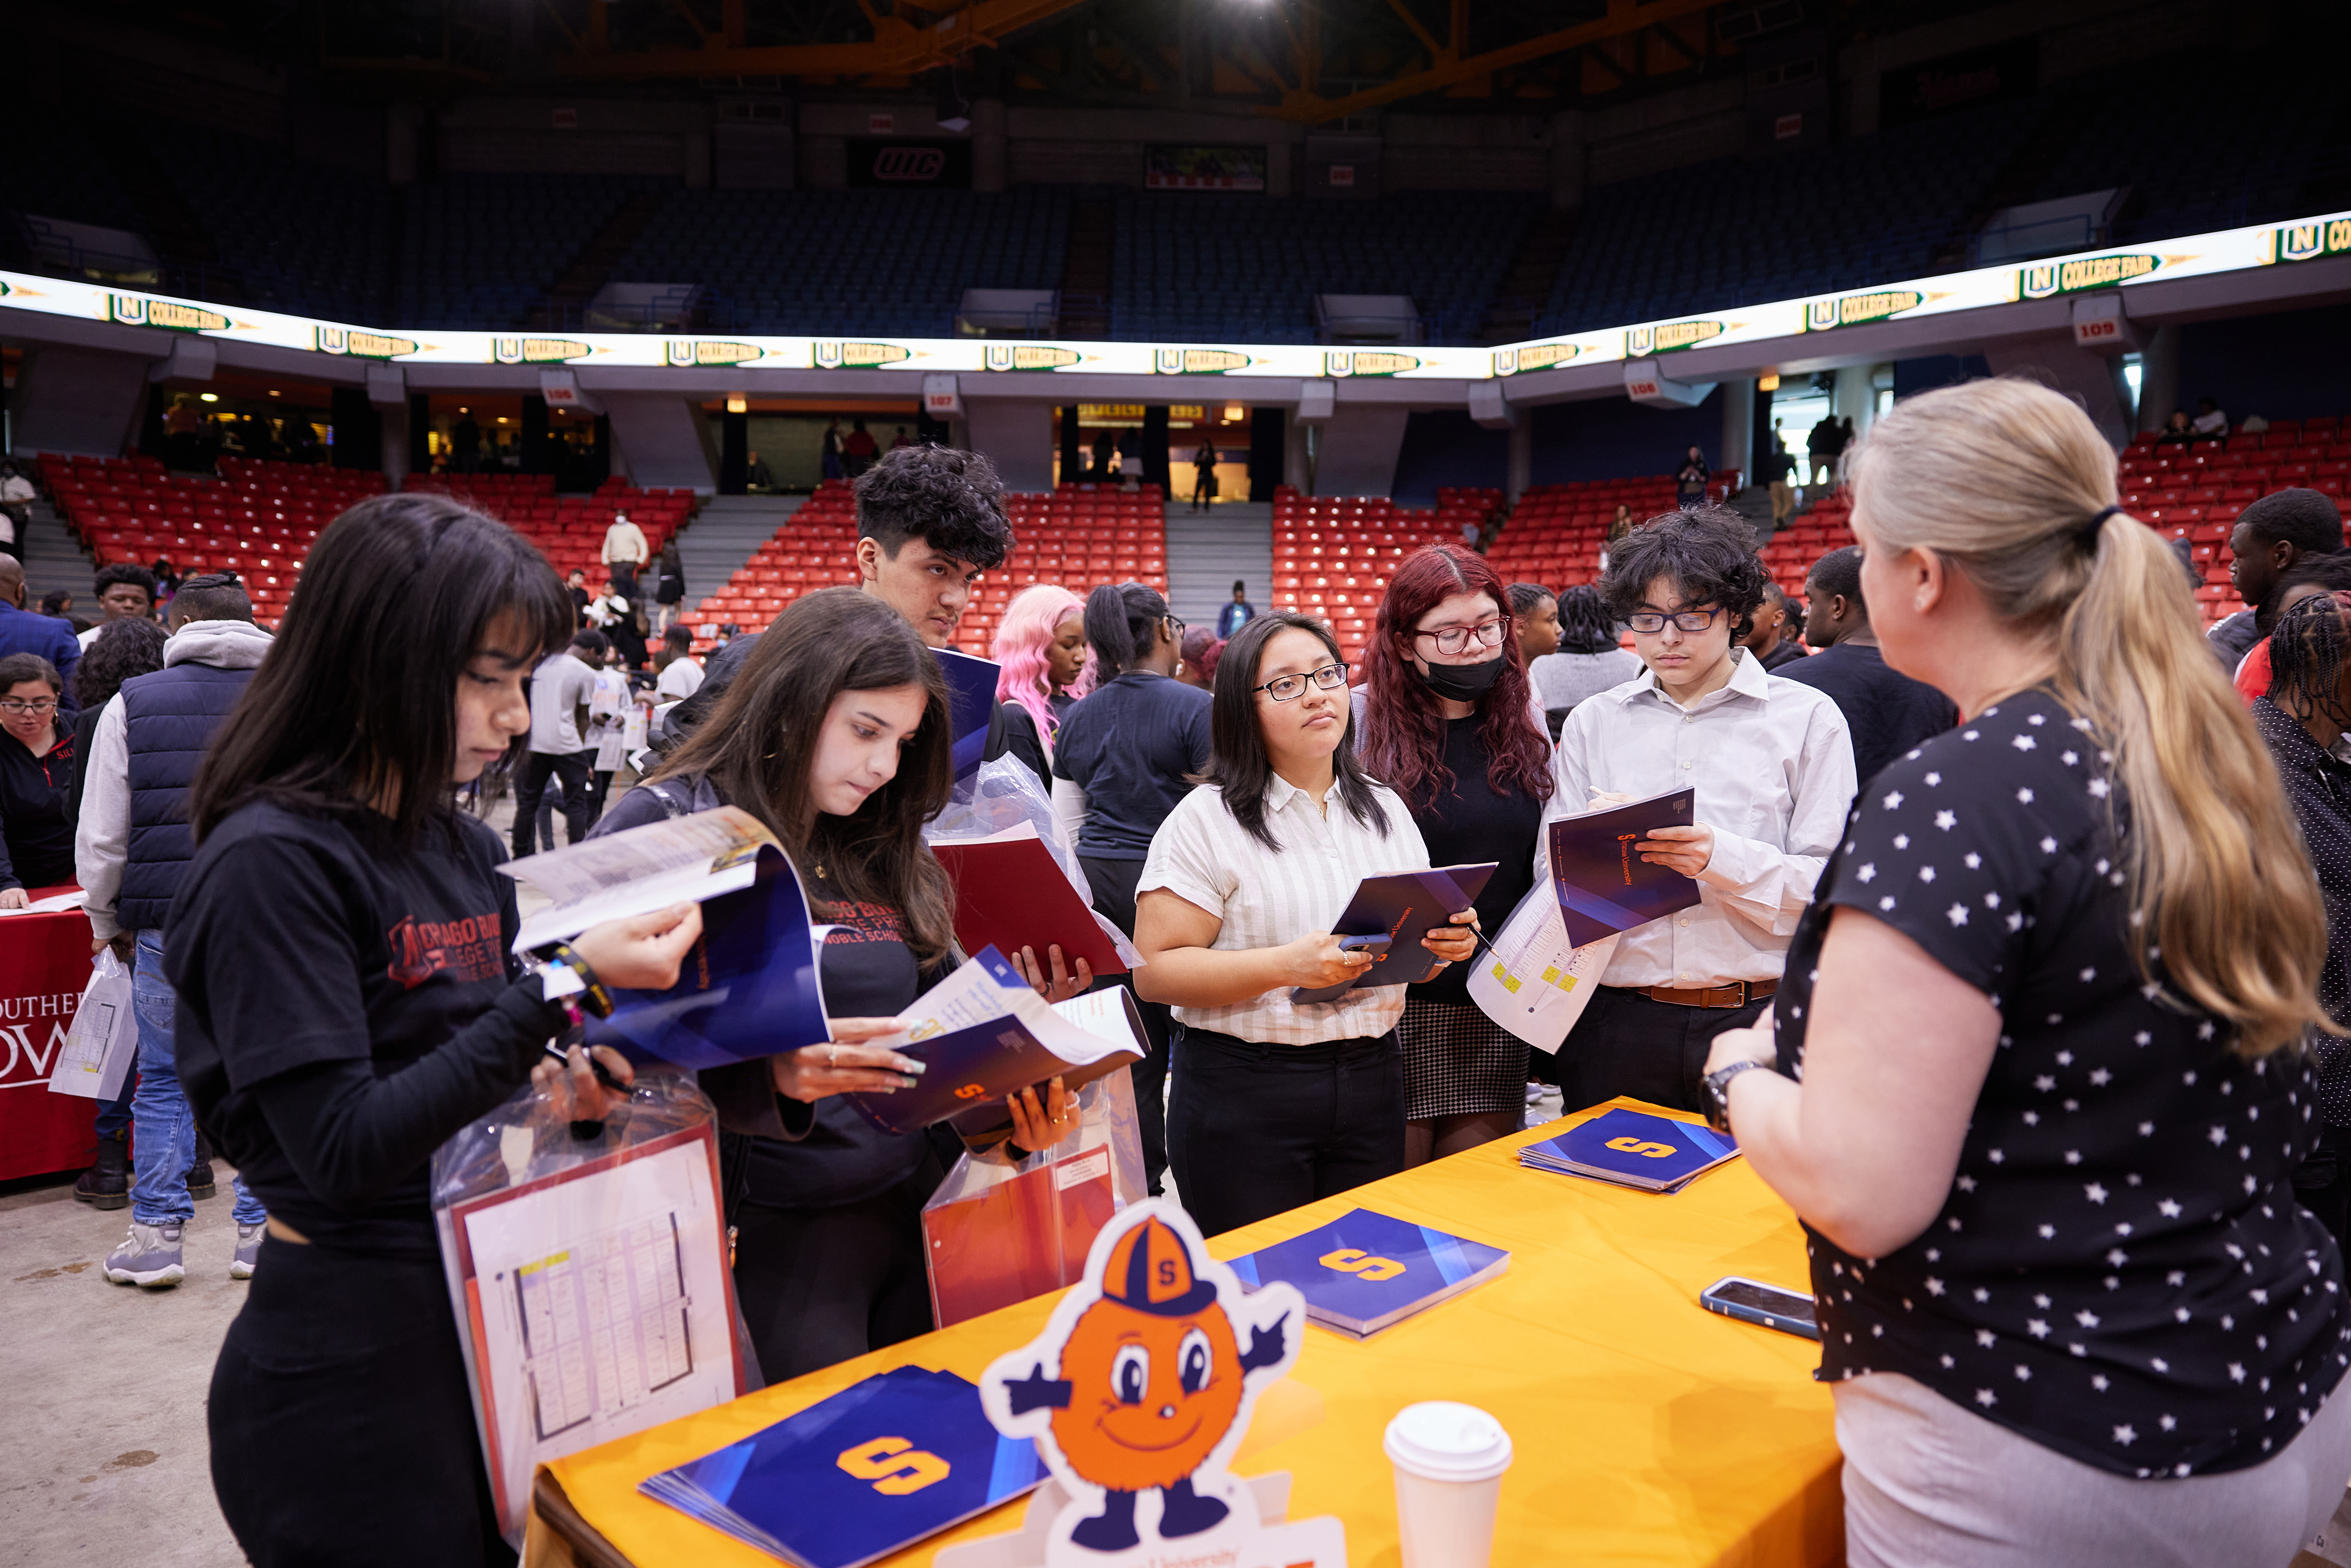 Students crowd around a college booth as they take notes, ask questions, and look at their pamphlet. The college recruiter has blonde hair in a pony tail and is facing towards the students, her face is not visible. Students are wearing their Noble Schools sweater that is a dark navy blue. The college booth table is yellow and has pamphlets and other college documents located.